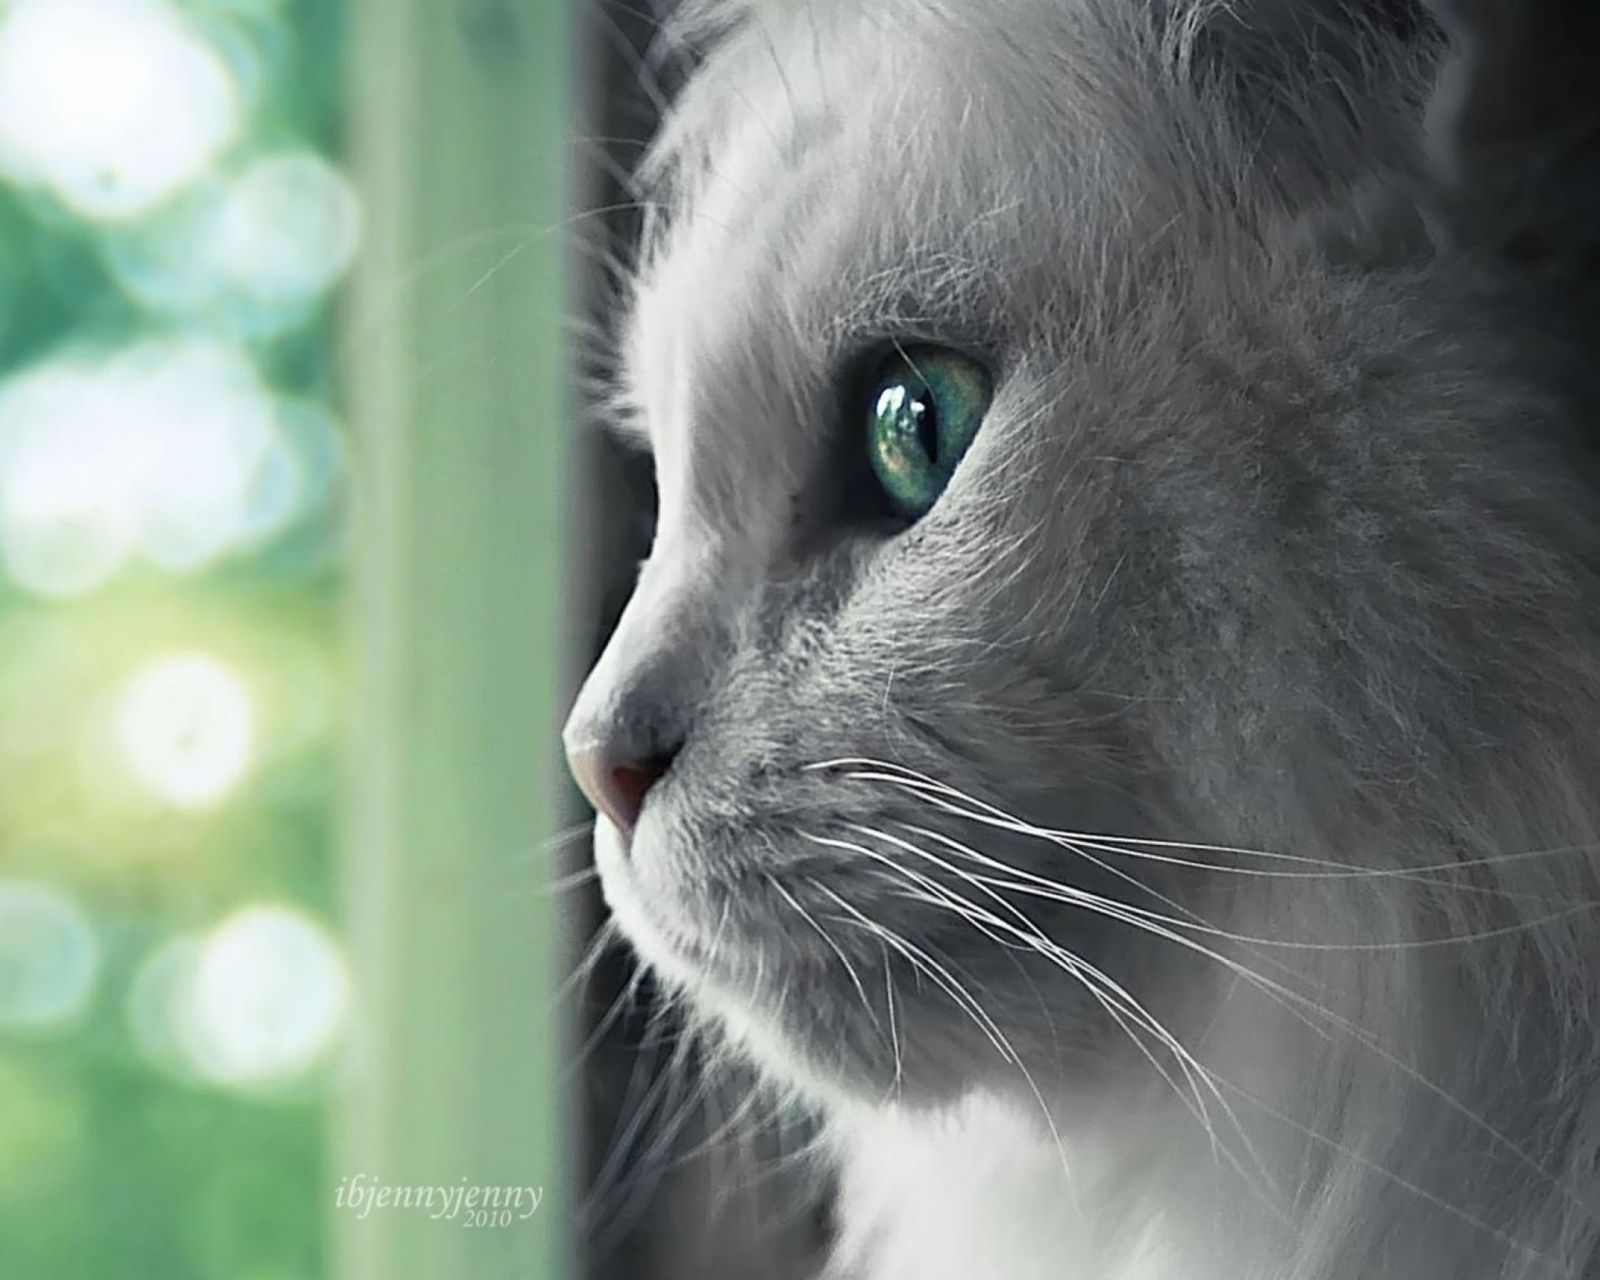 White Cat Close Up wallpaper 1600x1280